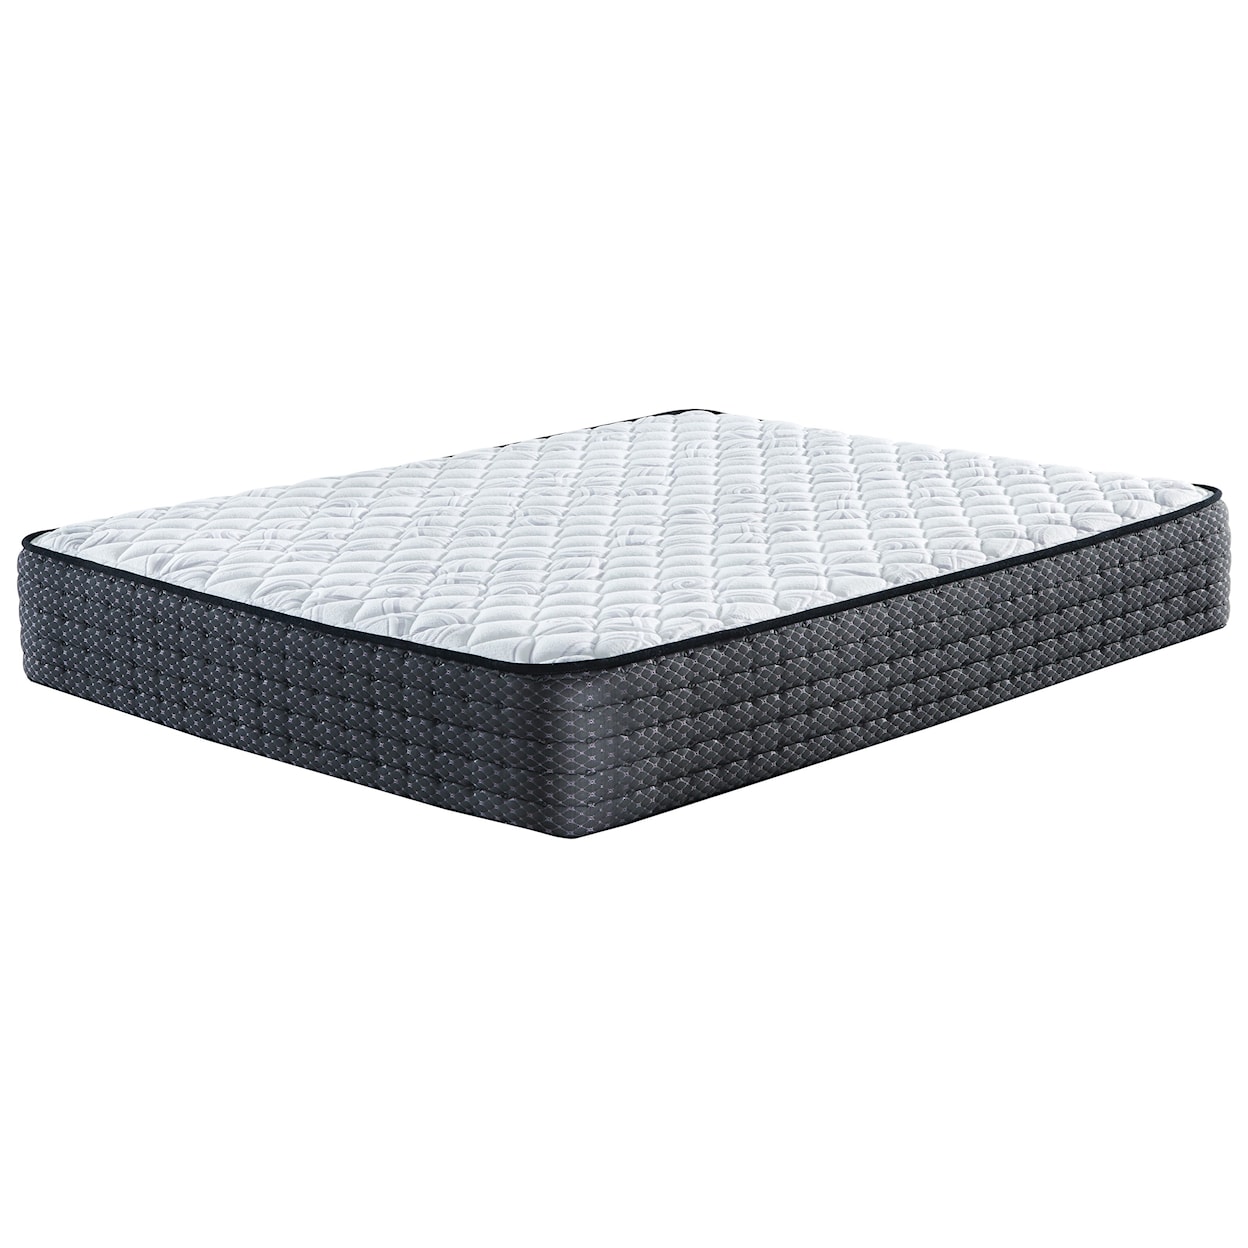 Sierra Sleep M625 Limited Edition Firm Full 11" Firm Pocketed Coil Mattress